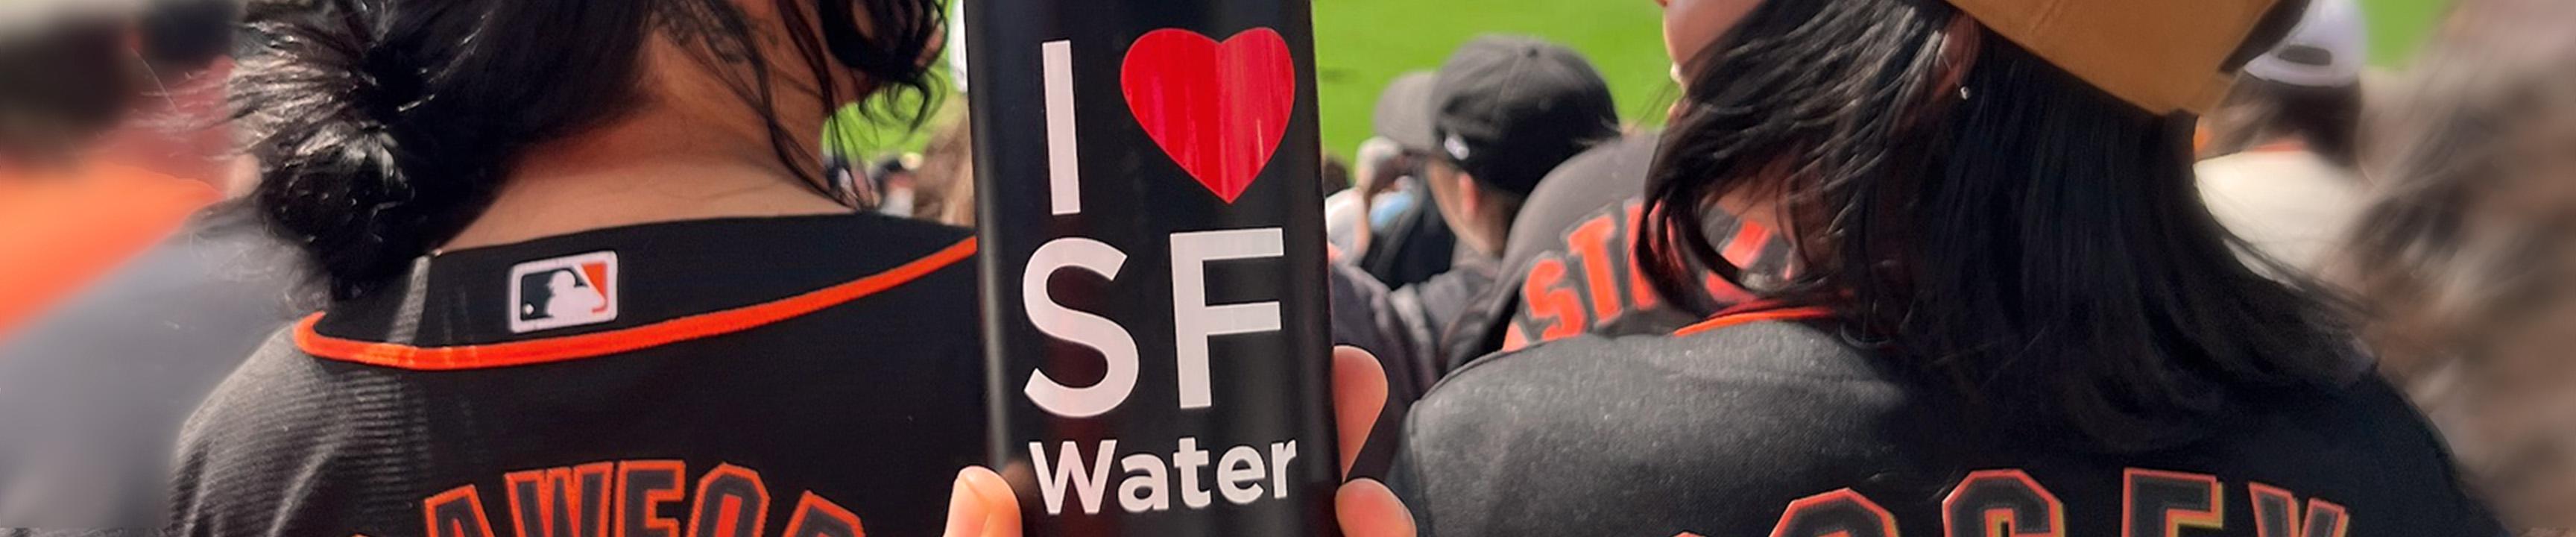 Fans enjoying the Giants game and a water bottle with I heart SF Water